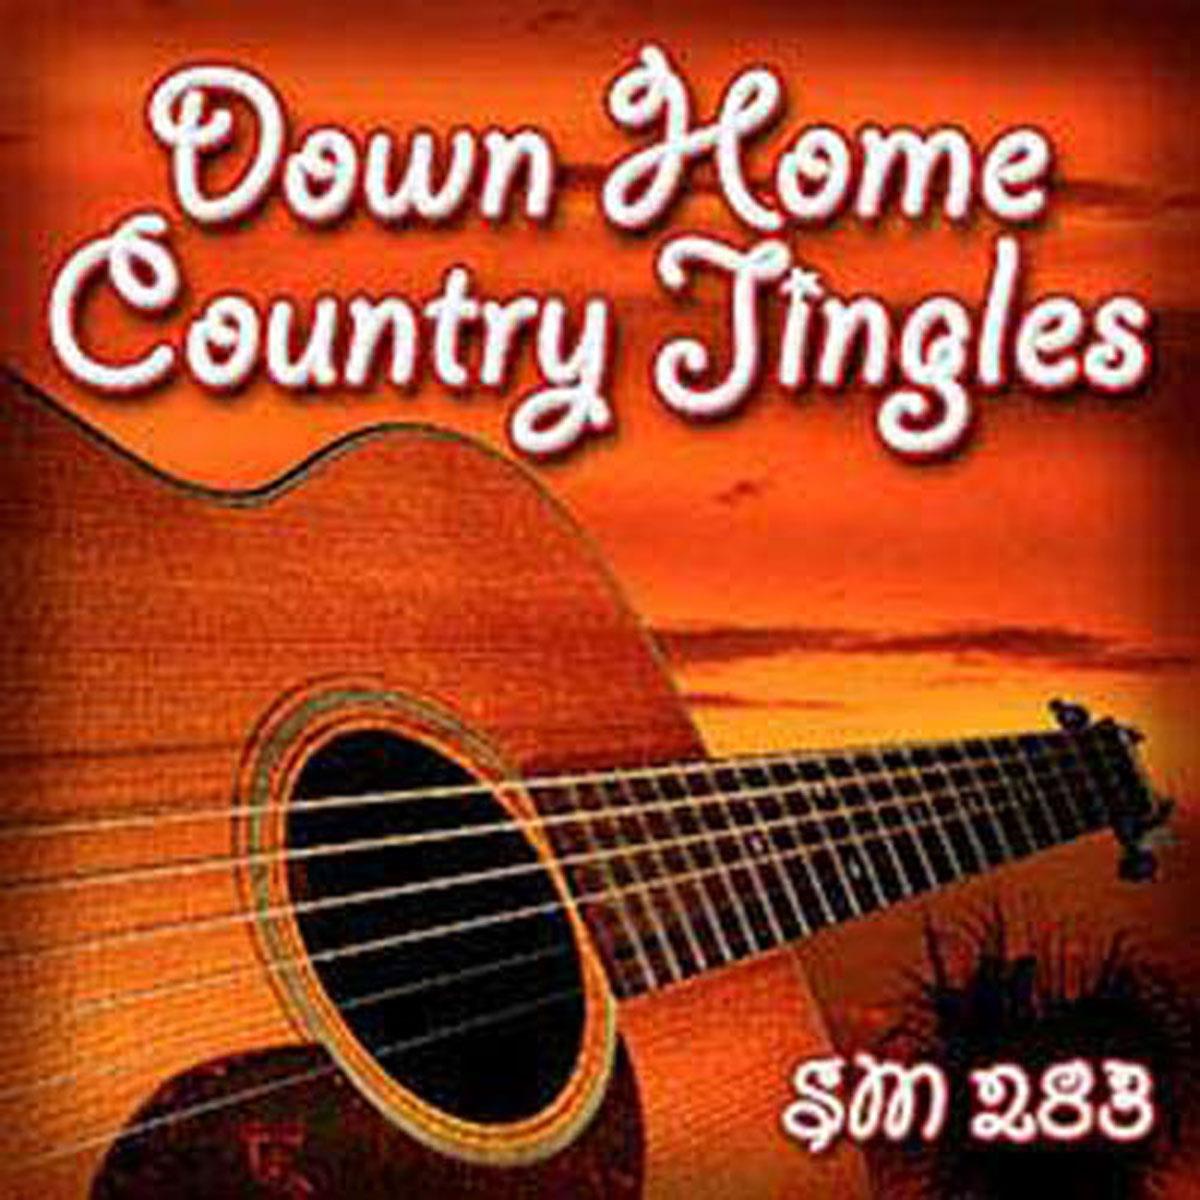 

Sound Ideas Royalty Free Music Down Home Country Jingles, Digital Download